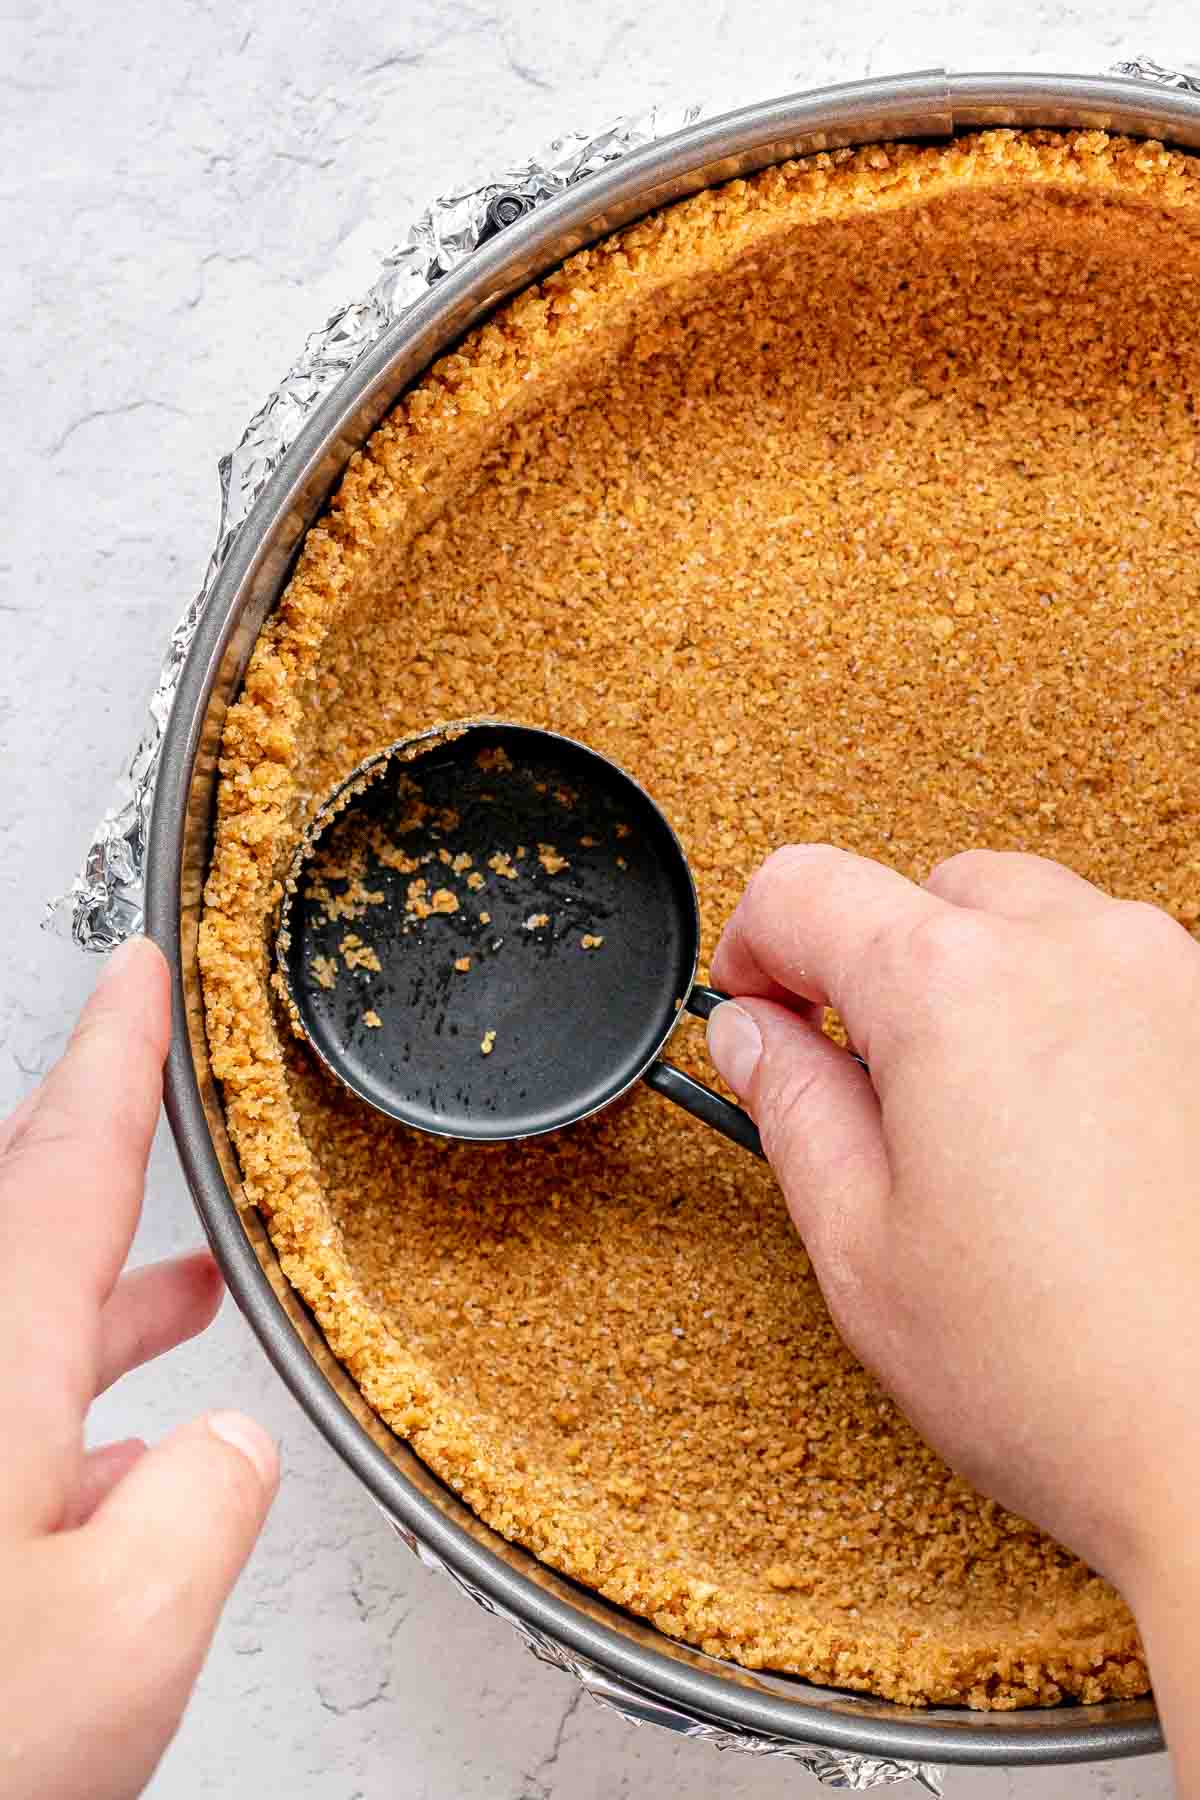 Coconut Cheesecake crust being pressed into baking dish